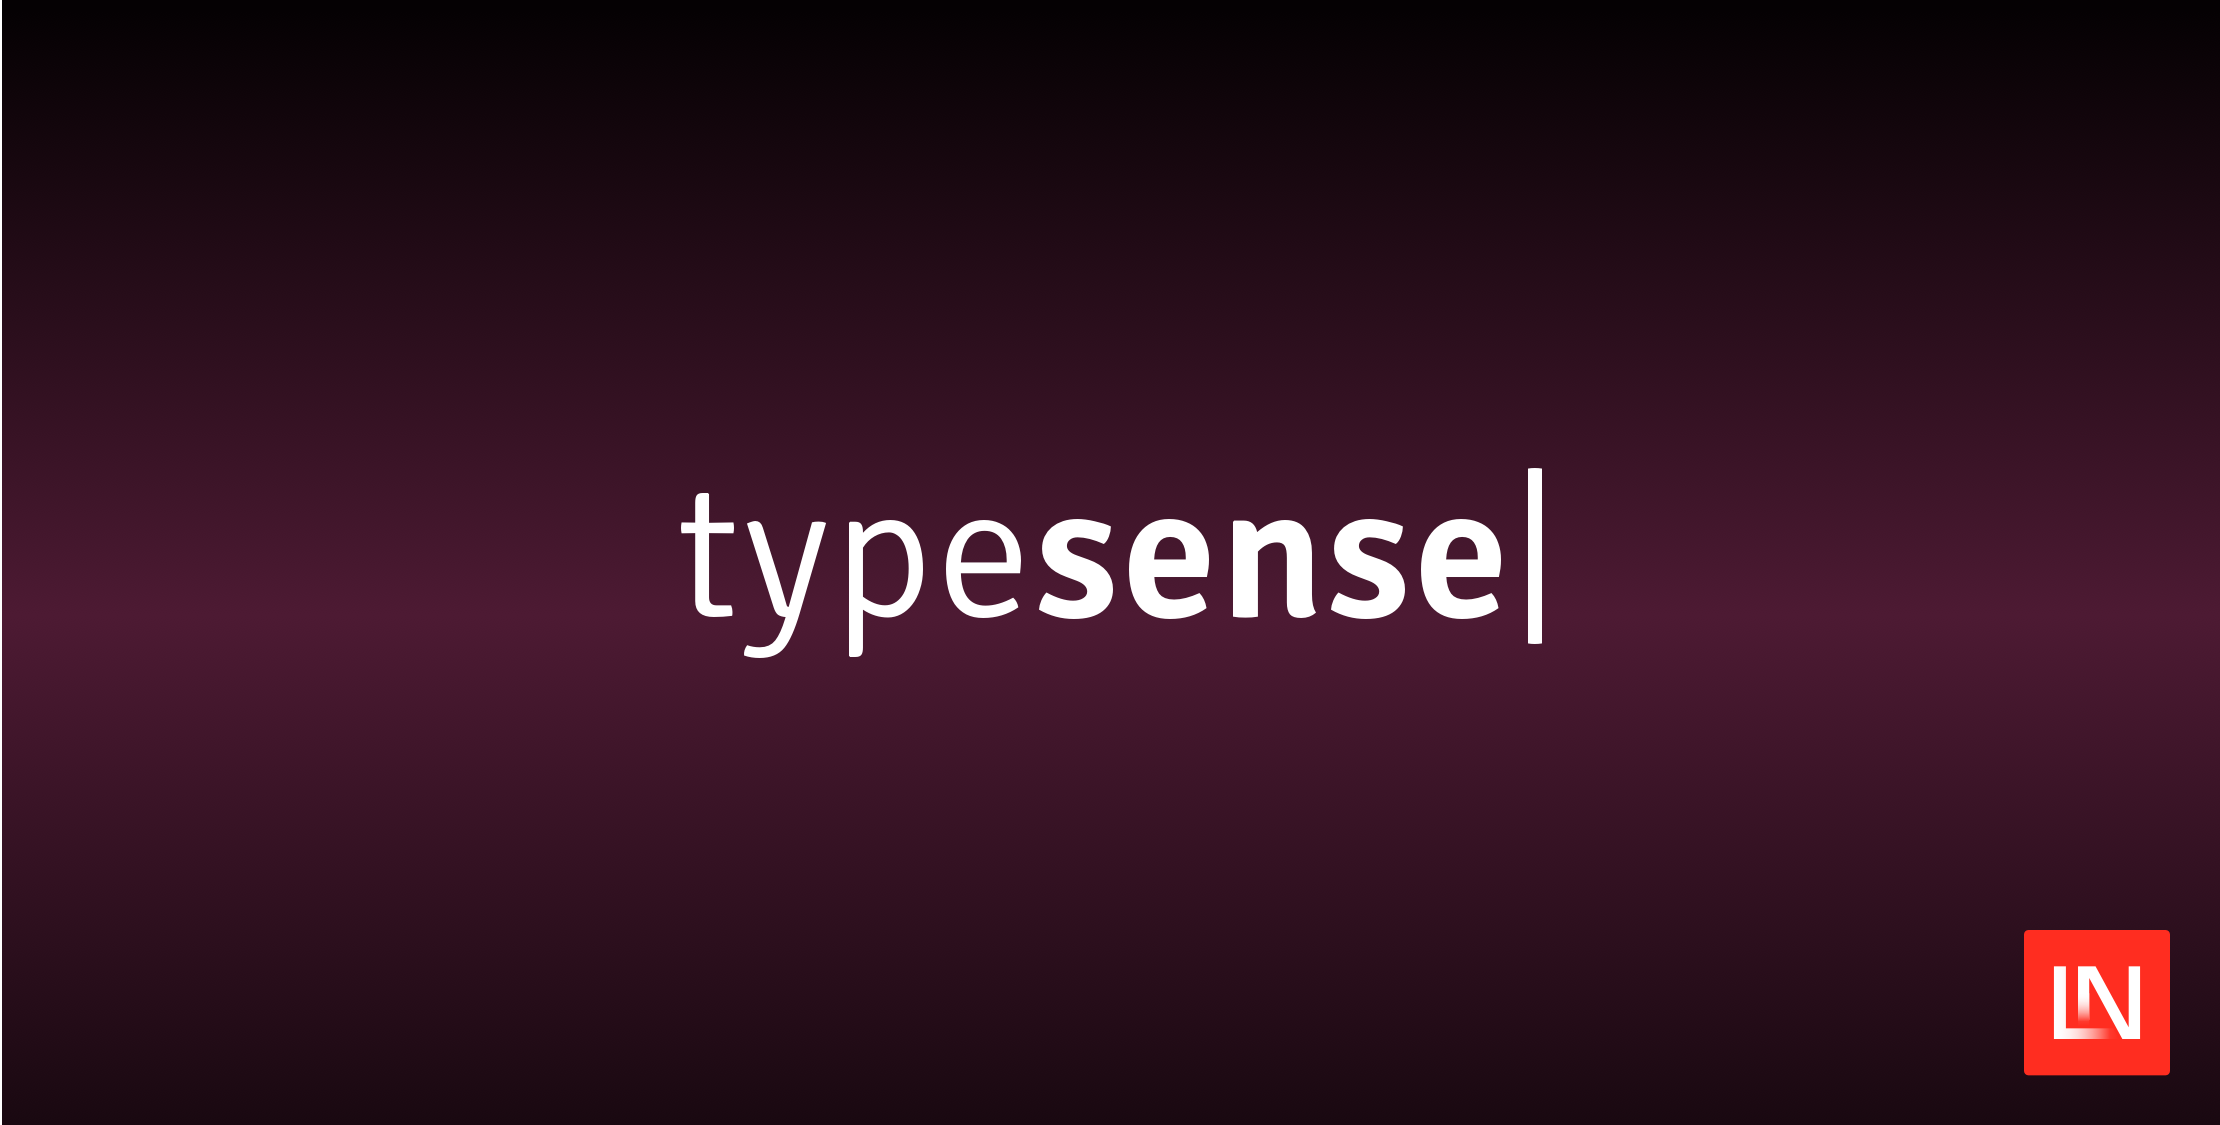 Laravel Scout Adds Typesense, A Lightening-fast Open-source Search image